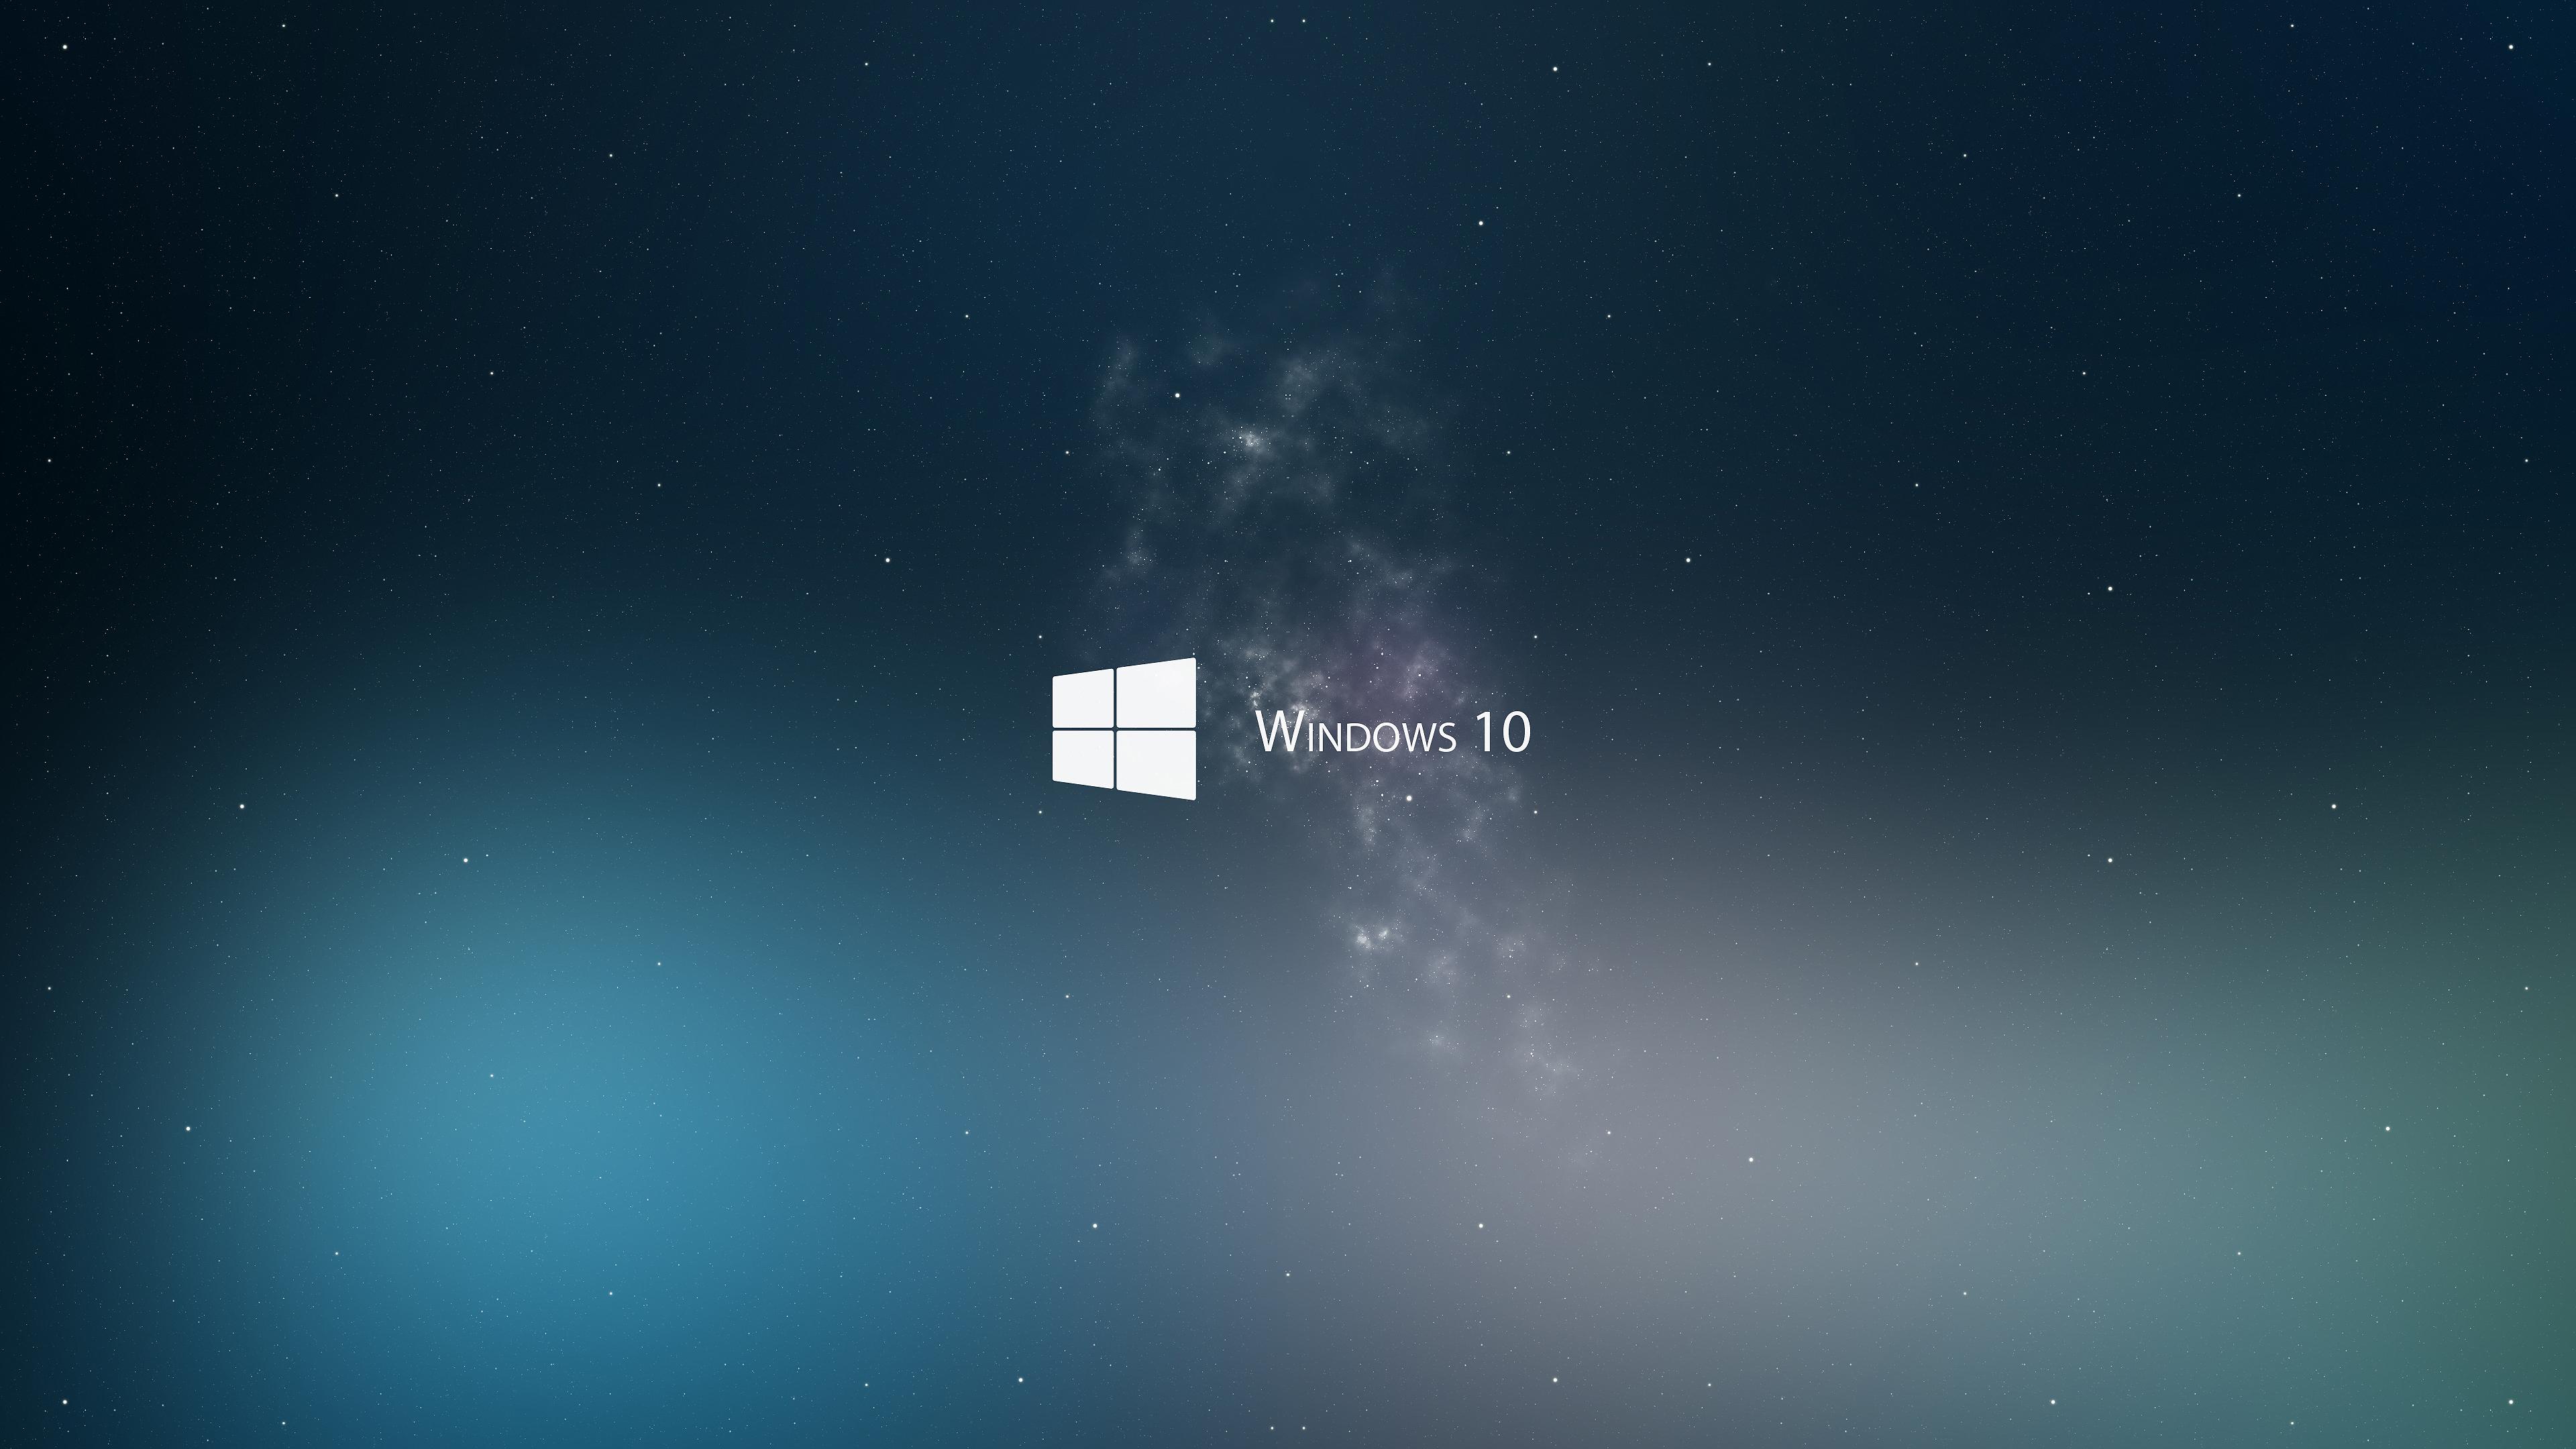 Windows 10 Wallpaper and Background Image